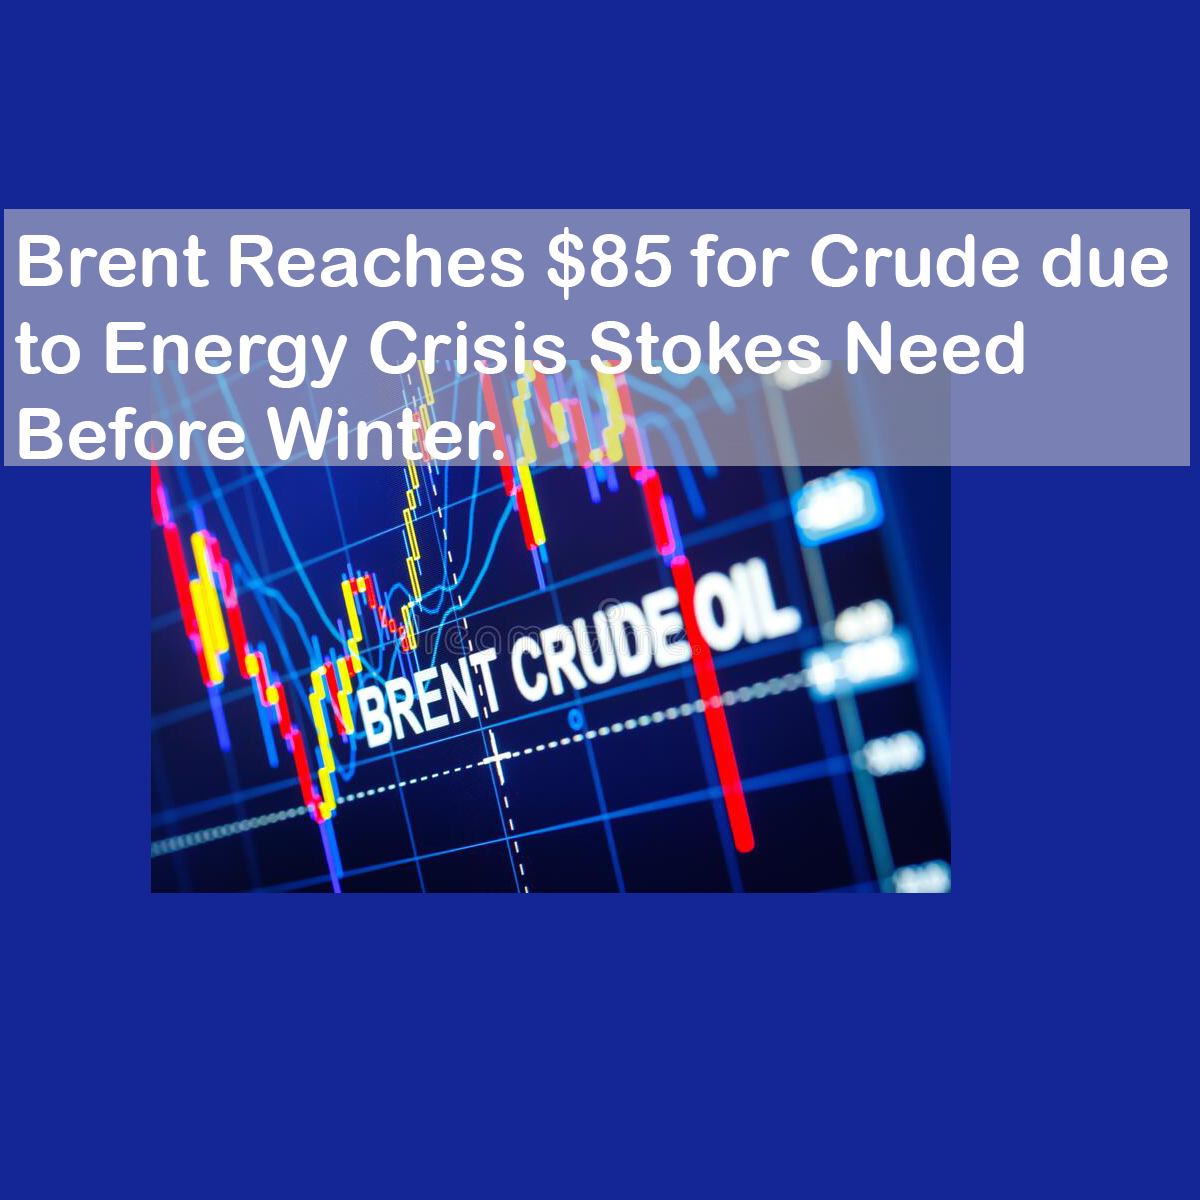 Brent Reaches $85 for Crude due to Energy Crisis Stokes Need Before Winter.